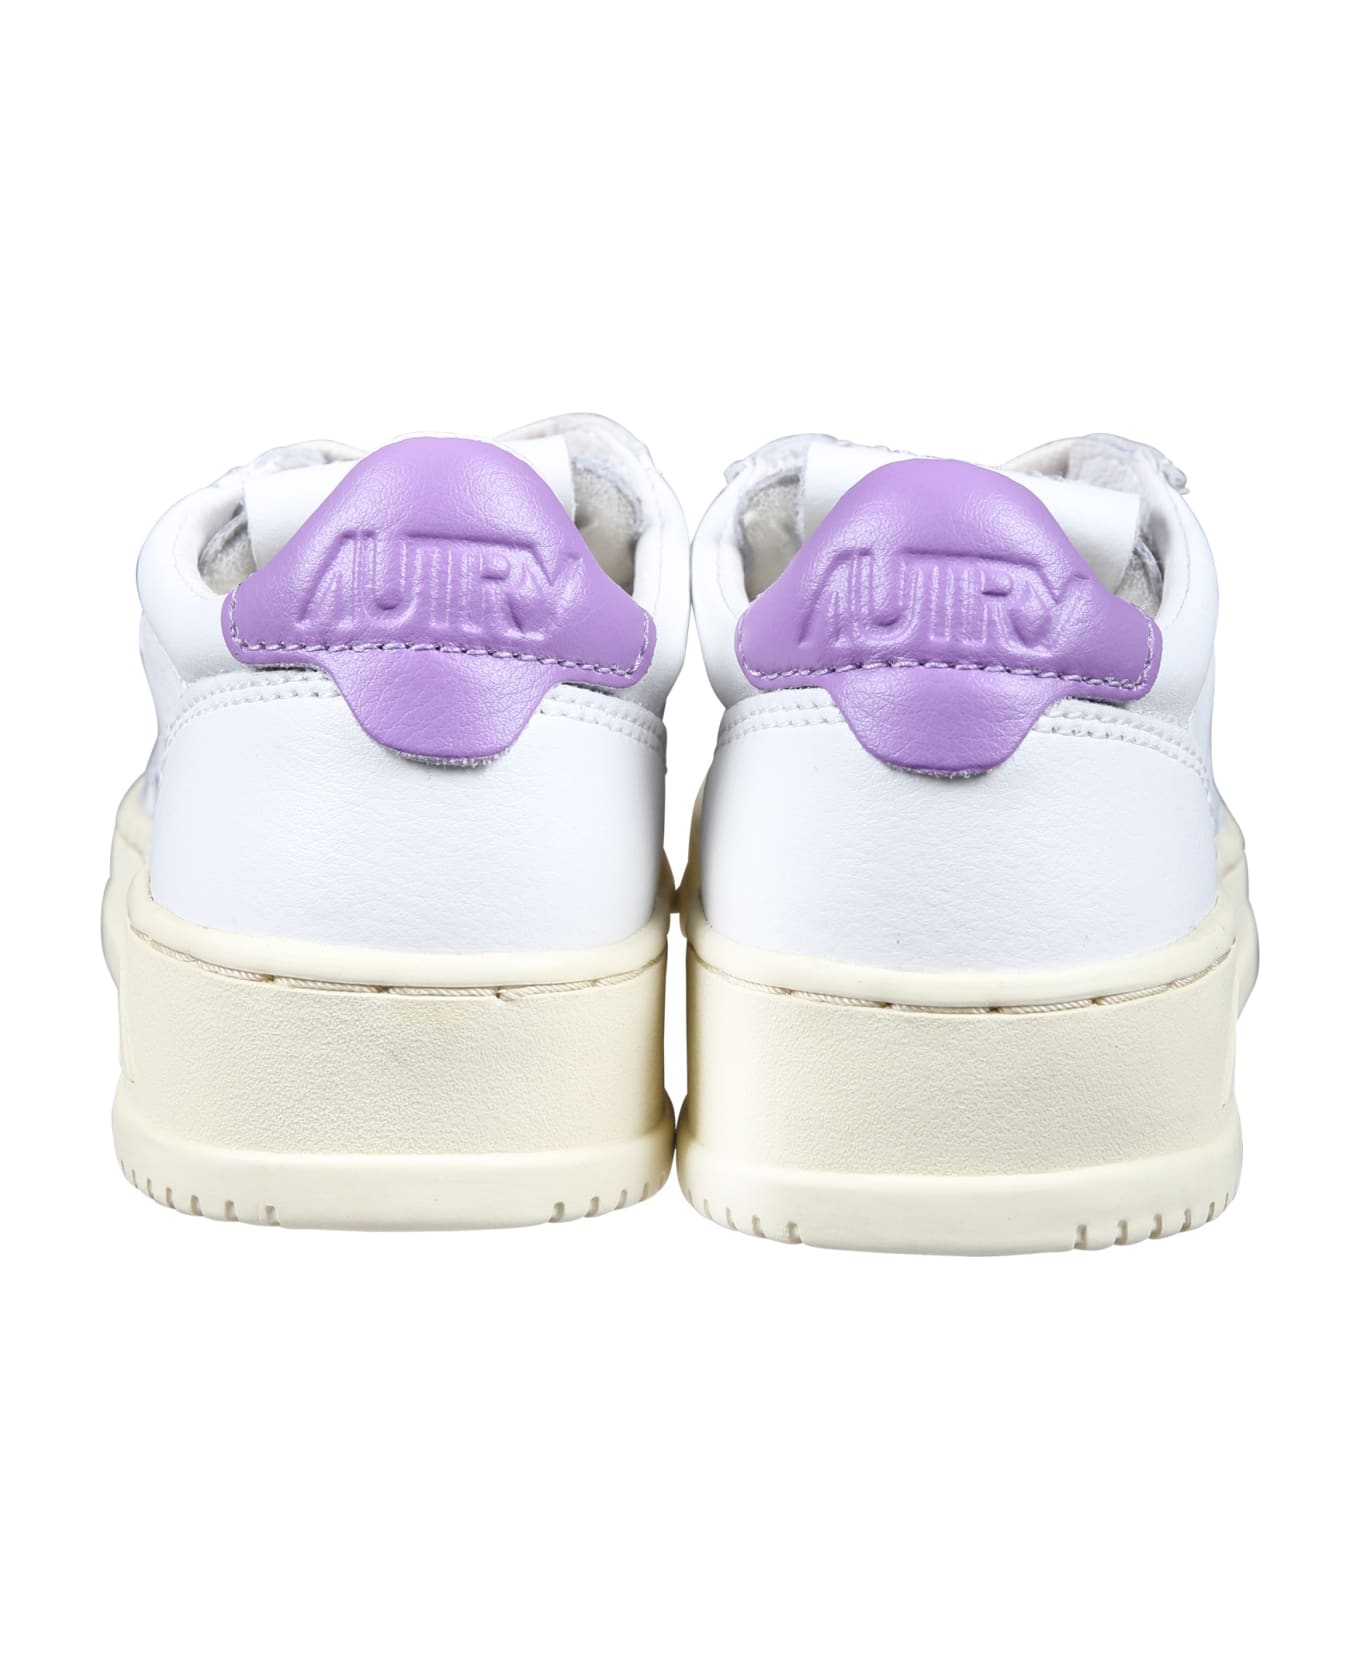 Autry Medalist Low Sneakers For Kids - White